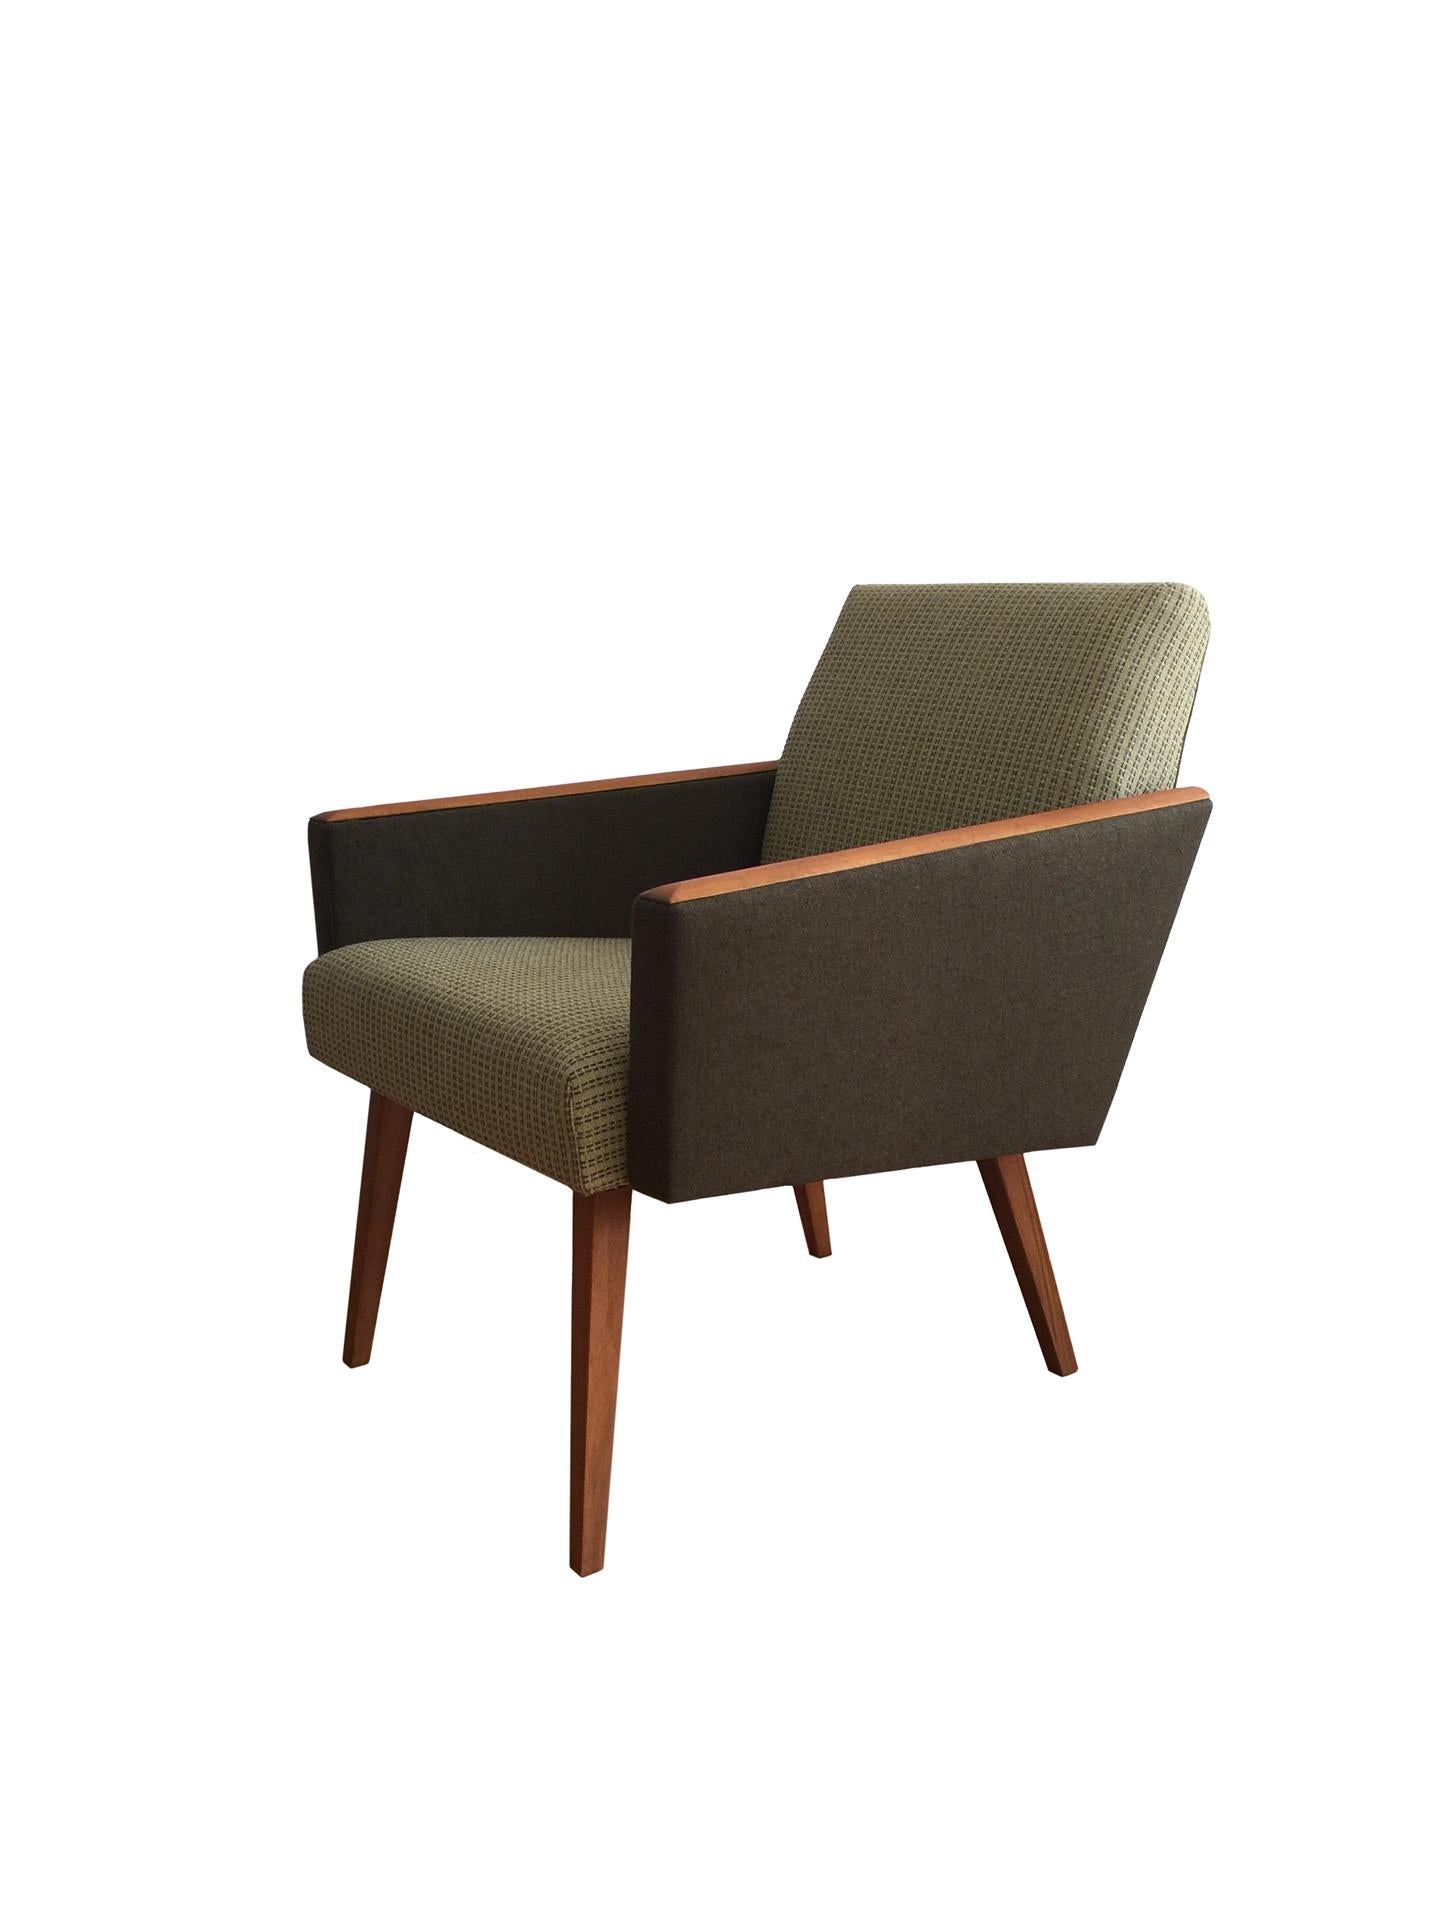 This lounge chair with a modernist silhouette was designed in the 1970s. It projects a distinctive appeal brought by a singular combination of fabrics, arranged in an exquisite dual-texture/dual-tone pattern, and armrests and legs made of solid